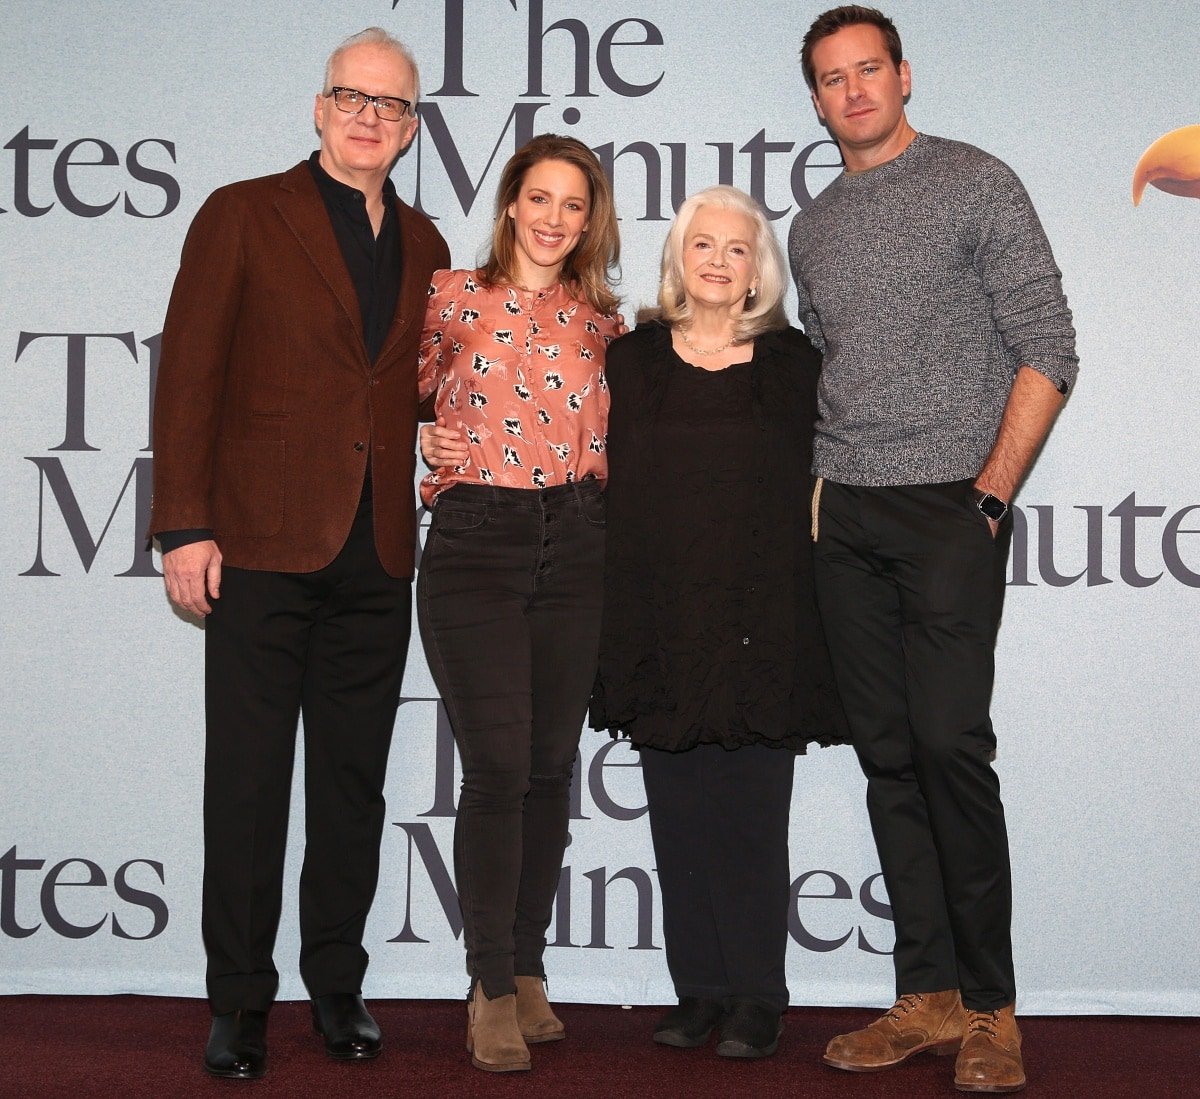 Armie Hammer with the cast and creative team behind the Broadway play The Minutes at a photocall